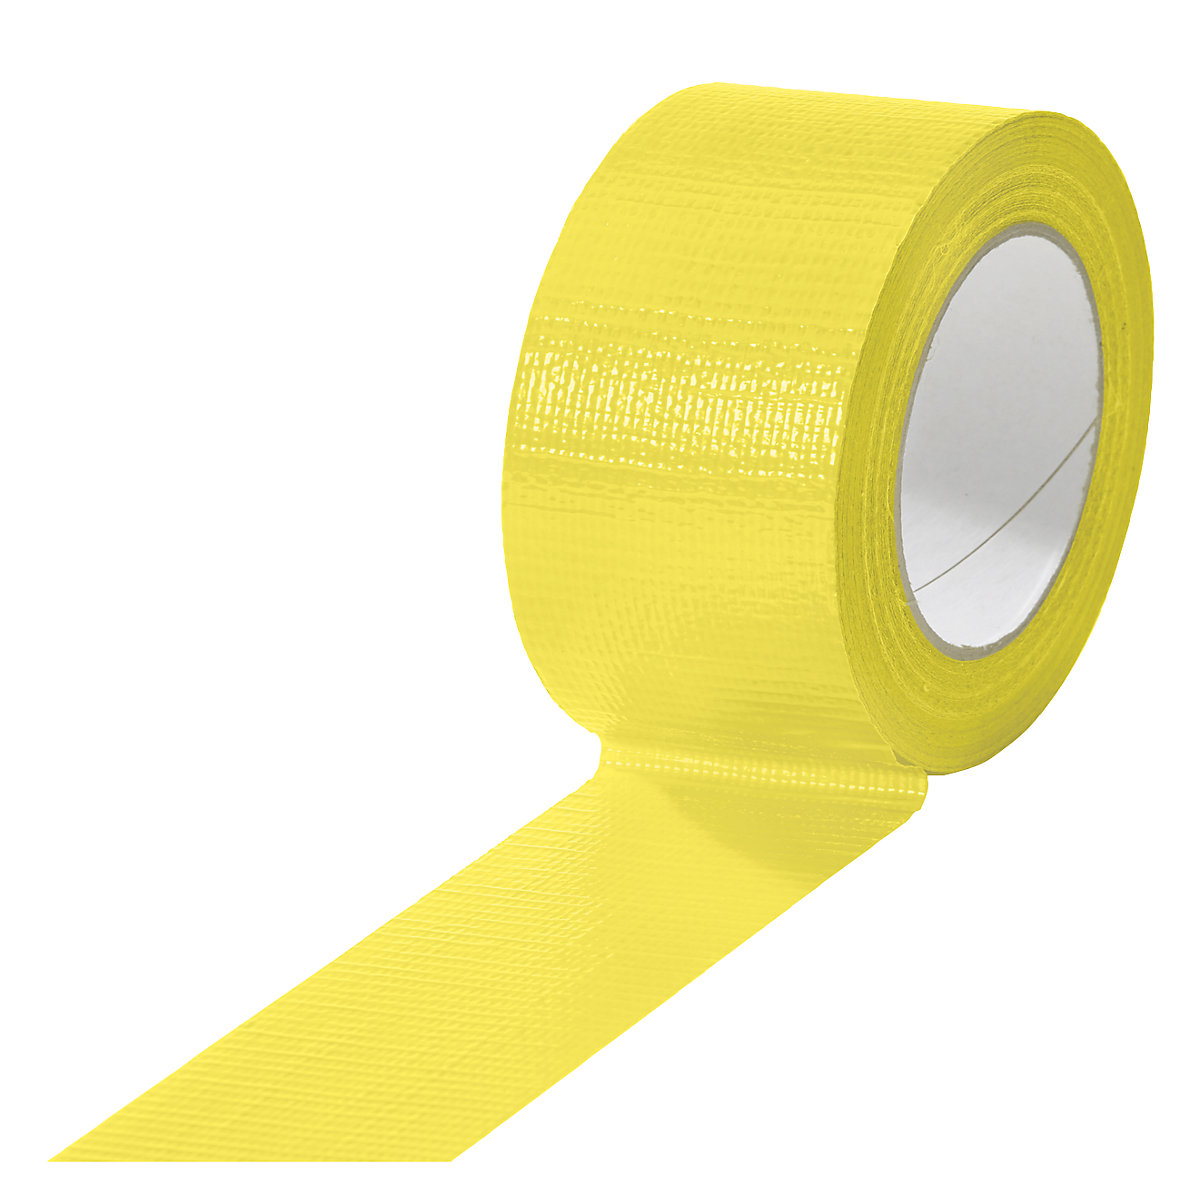 Fabric tape, in different colours, pack of 18 rolls, yellow, tape width 50 mm-3